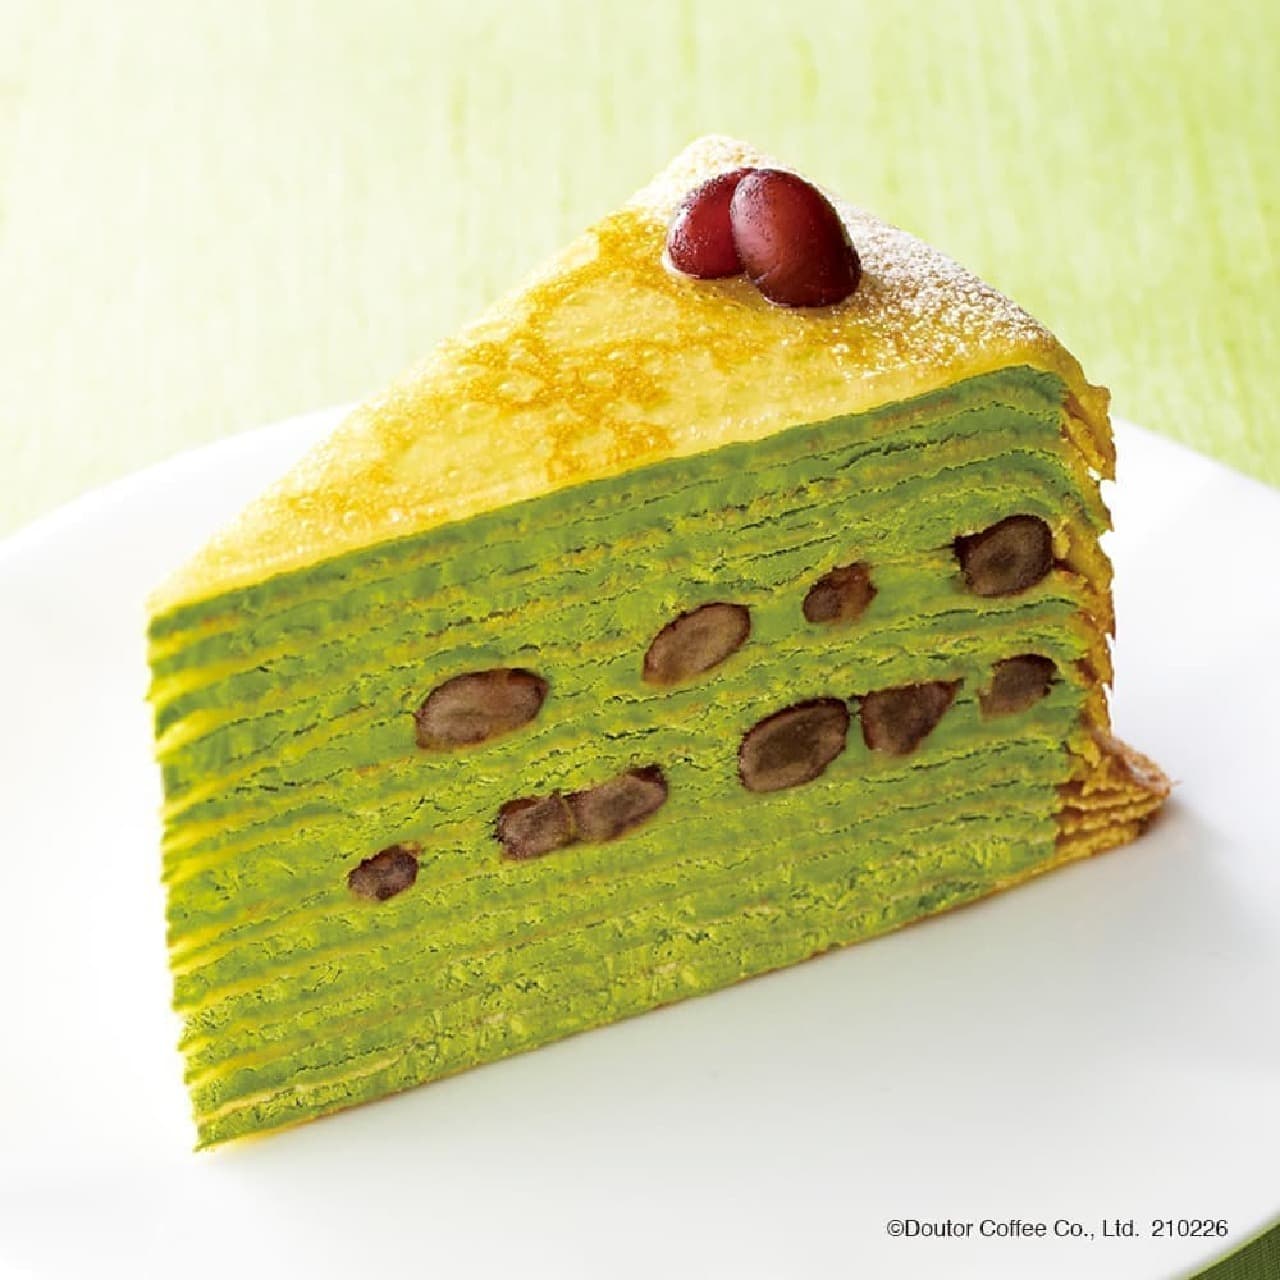 Doutor "Mille crêpes of Uji matcha from Kyoto prefecture"